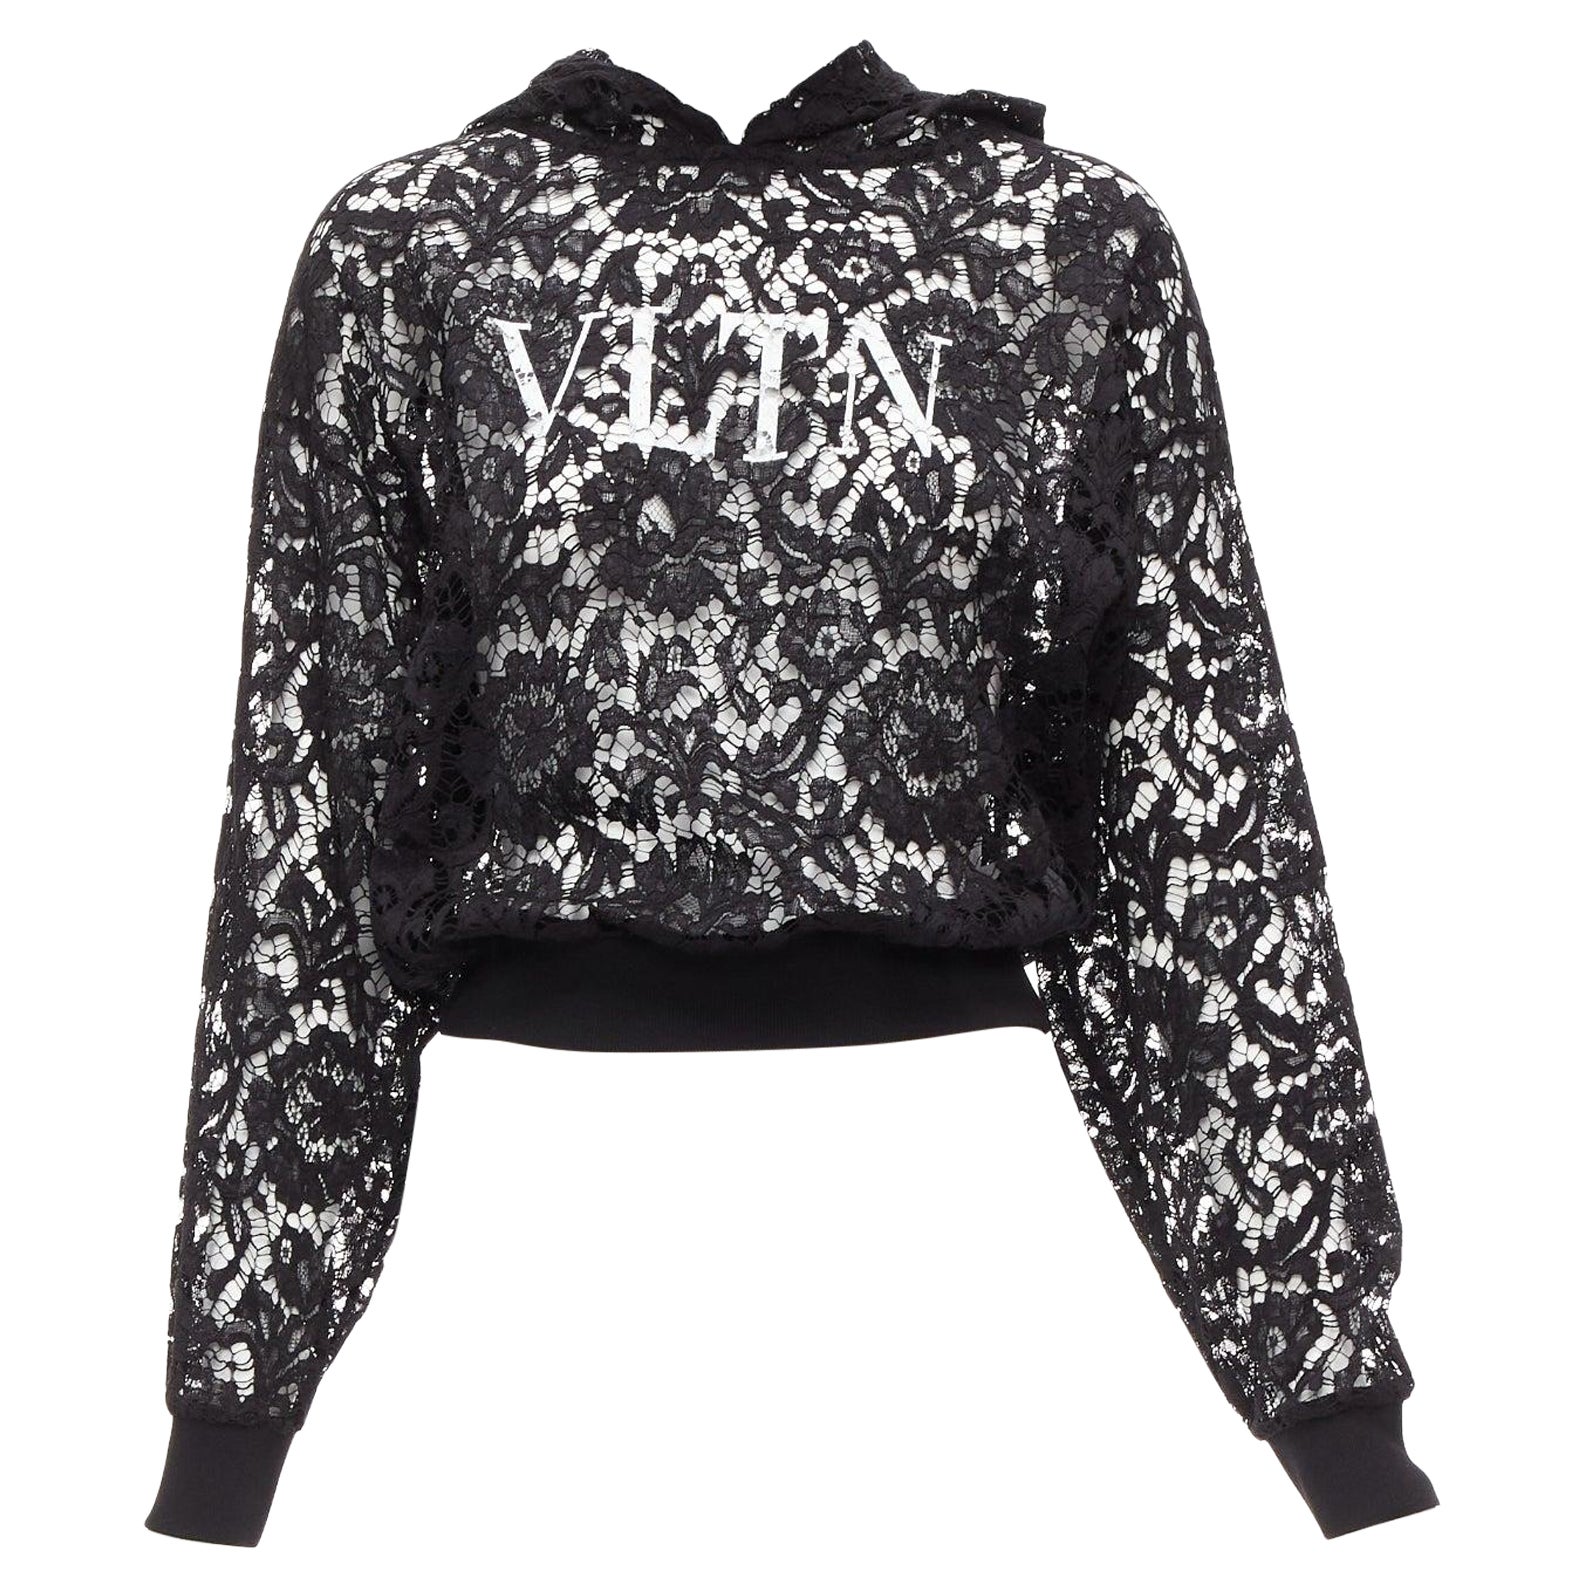 VALENTINO VLTN logo print floral black sheer lace hoodie lace cropped hoodie S For Sale